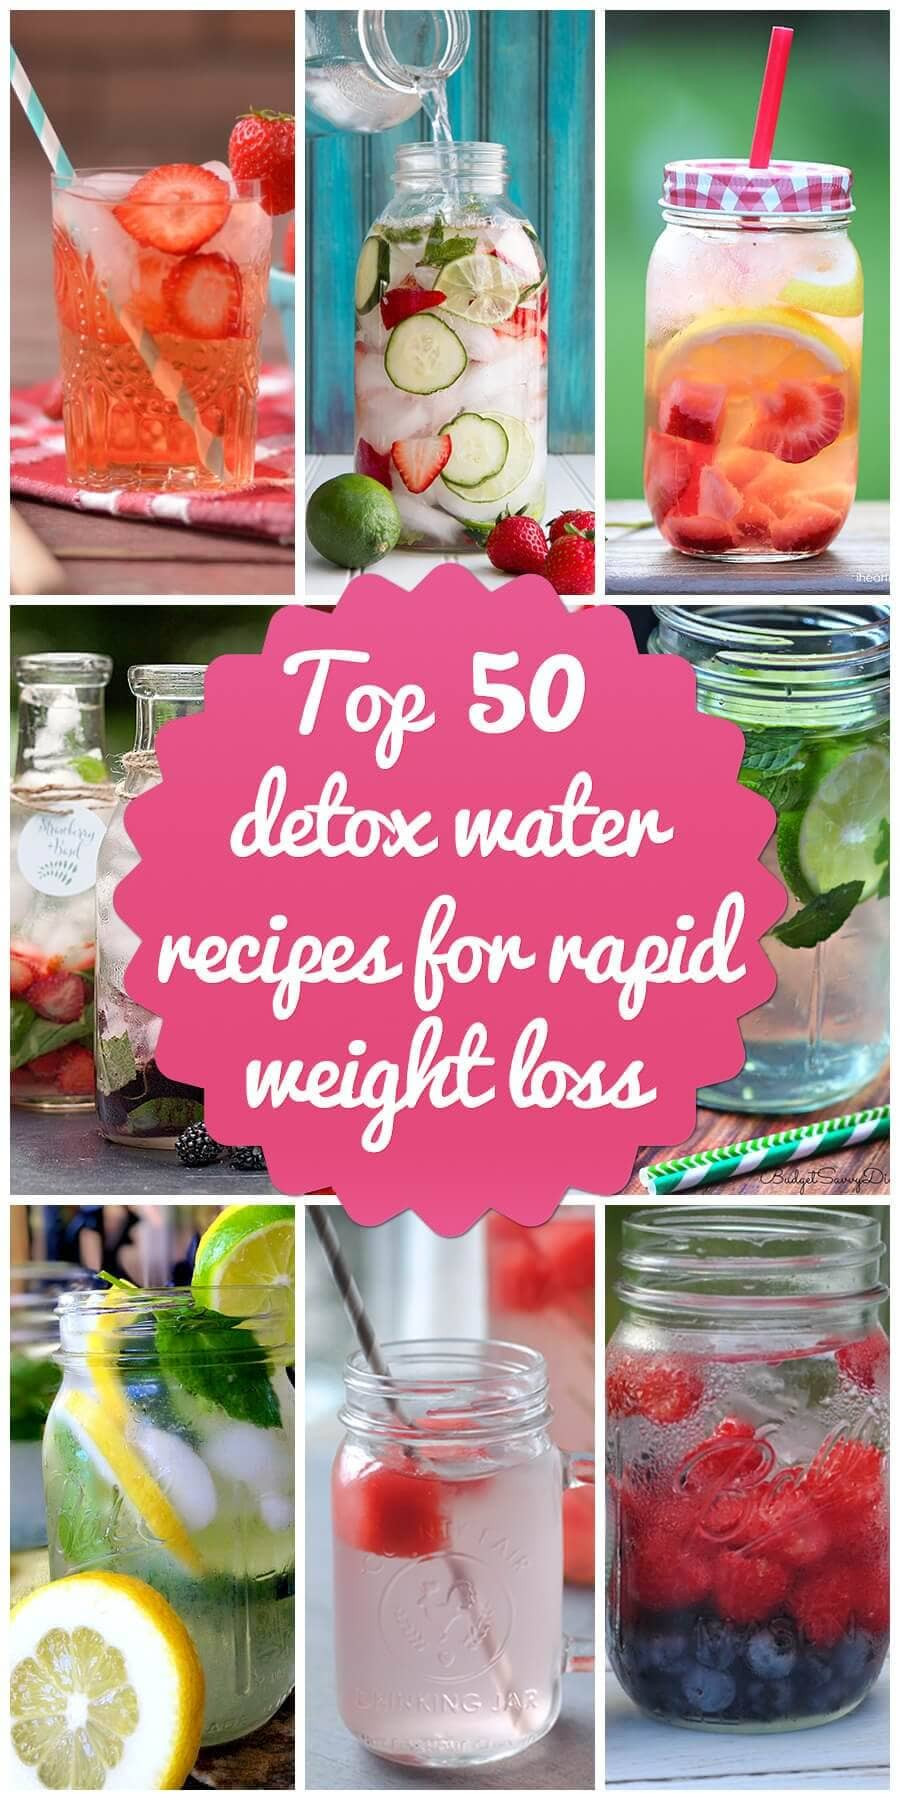 Weight Loss Waters Recipes
 Top 50 Detox Water Recipes for Rapid Weight Loss